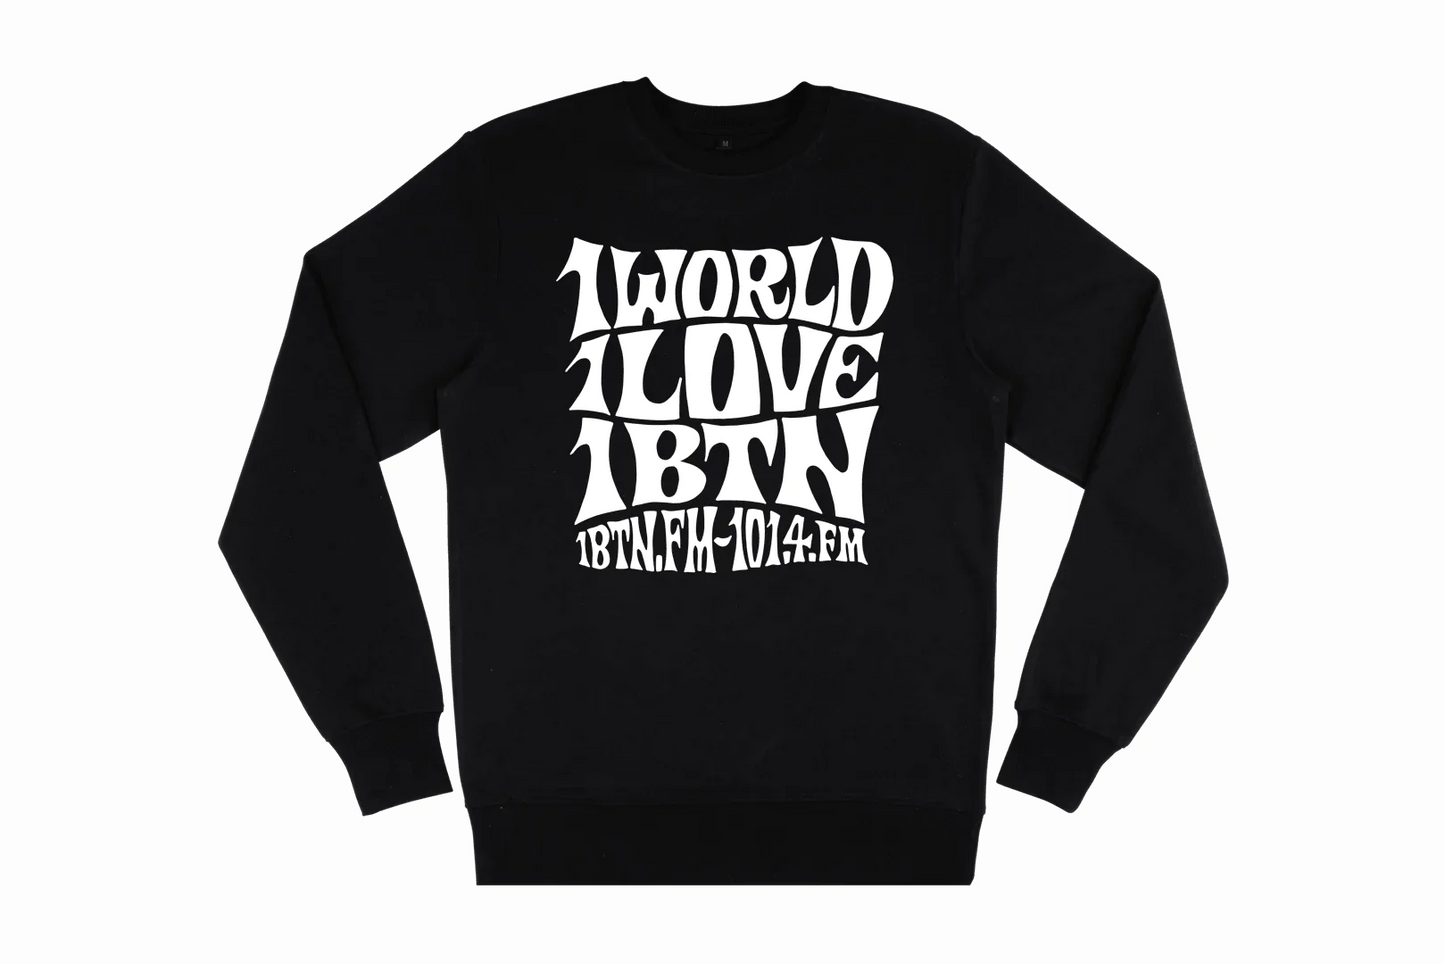 1 WORLD 1 LOVE by Swifty: Sweatshirt Official Merchandise of 1BTN.FM (5 Colour Options) - SOUND IS COLOUR